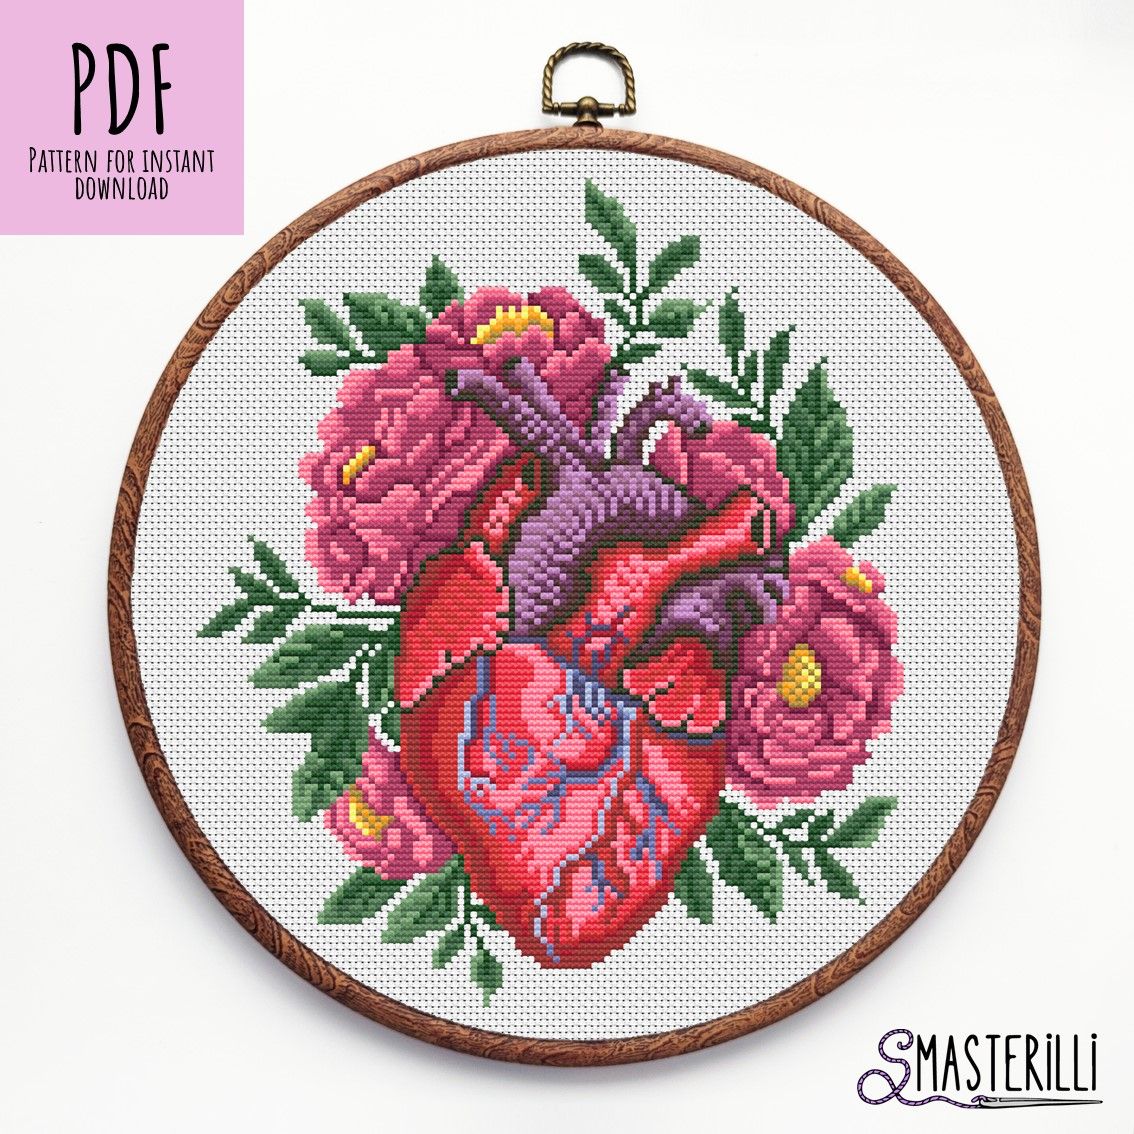 Anatomical heart cross stitch pattern with flowers and plants. Embroidery ornament by Smasterilli